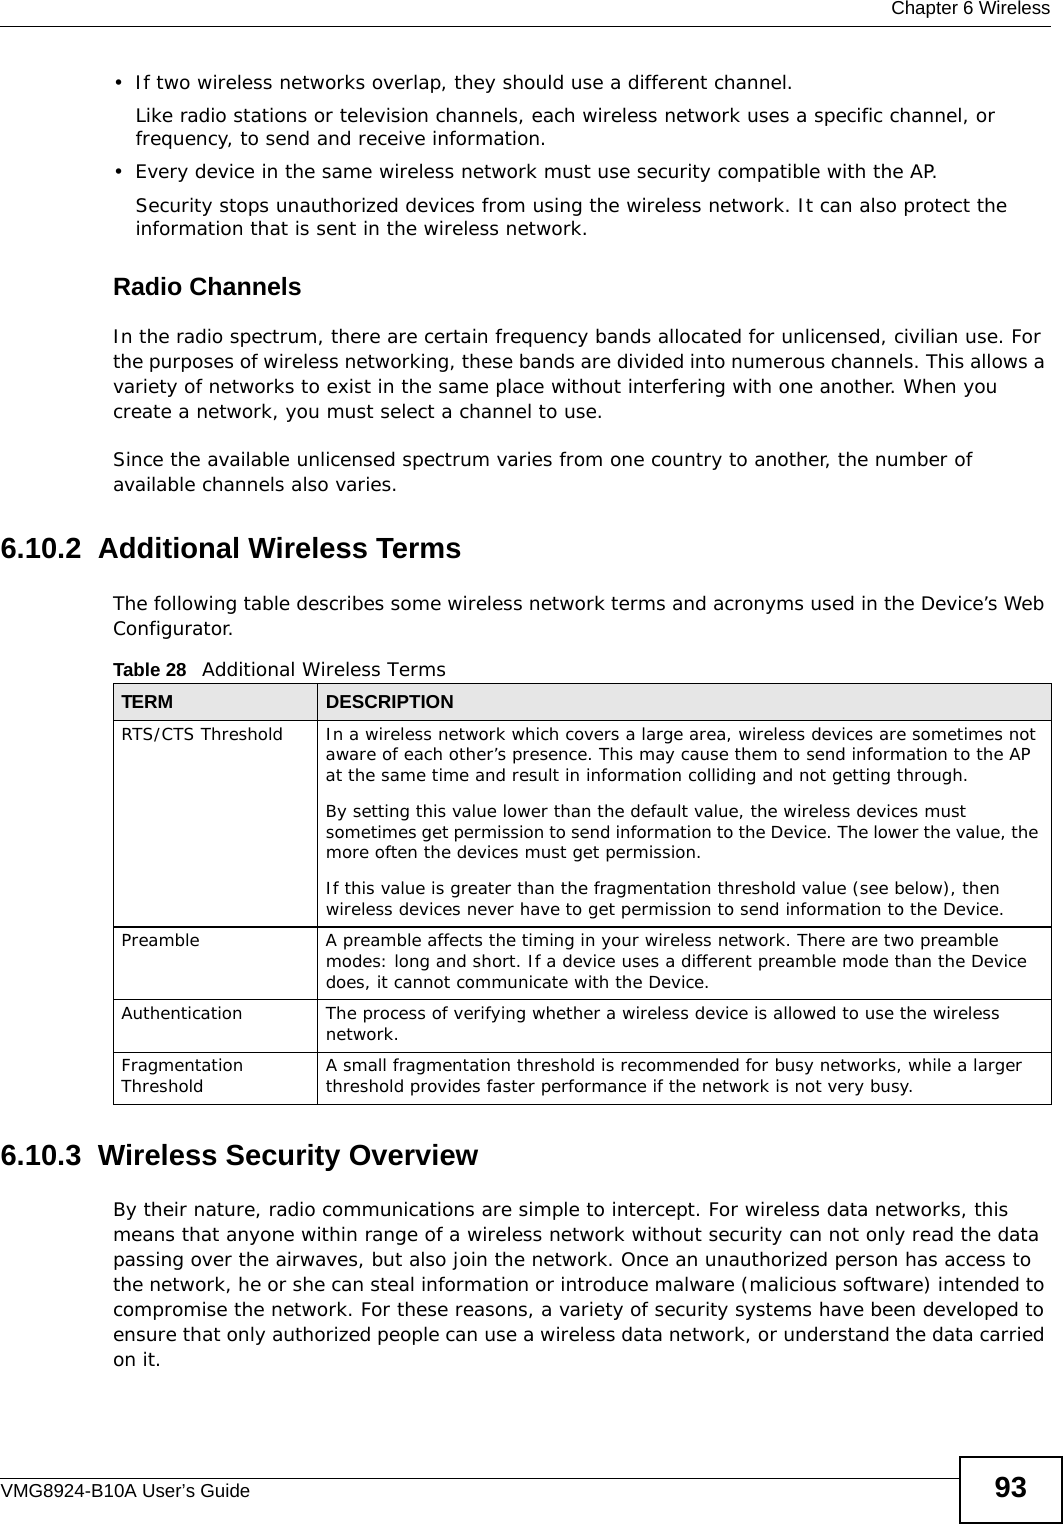  Chapter 6 WirelessVMG8924-B10A User’s Guide 93• If two wireless networks overlap, they should use a different channel.Like radio stations or television channels, each wireless network uses a specific channel, or frequency, to send and receive information.• Every device in the same wireless network must use security compatible with the AP.Security stops unauthorized devices from using the wireless network. It can also protect the information that is sent in the wireless network.Radio ChannelsIn the radio spectrum, there are certain frequency bands allocated for unlicensed, civilian use. For the purposes of wireless networking, these bands are divided into numerous channels. This allows a variety of networks to exist in the same place without interfering with one another. When you create a network, you must select a channel to use. Since the available unlicensed spectrum varies from one country to another, the number of available channels also varies. 6.10.2  Additional Wireless TermsThe following table describes some wireless network terms and acronyms used in the Device’s Web Configurator.6.10.3  Wireless Security OverviewBy their nature, radio communications are simple to intercept. For wireless data networks, this means that anyone within range of a wireless network without security can not only read the data passing over the airwaves, but also join the network. Once an unauthorized person has access to the network, he or she can steal information or introduce malware (malicious software) intended to compromise the network. For these reasons, a variety of security systems have been developed to ensure that only authorized people can use a wireless data network, or understand the data carried on it.Table 28   Additional Wireless TermsTERM DESCRIPTIONRTS/CTS Threshold In a wireless network which covers a large area, wireless devices are sometimes not aware of each other’s presence. This may cause them to send information to the AP at the same time and result in information colliding and not getting through.By setting this value lower than the default value, the wireless devices must sometimes get permission to send information to the Device. The lower the value, the more often the devices must get permission.If this value is greater than the fragmentation threshold value (see below), then wireless devices never have to get permission to send information to the Device.Preamble A preamble affects the timing in your wireless network. There are two preamble modes: long and short. If a device uses a different preamble mode than the Device does, it cannot communicate with the Device.Authentication The process of verifying whether a wireless device is allowed to use the wireless network.Fragmentation Threshold A small fragmentation threshold is recommended for busy networks, while a larger threshold provides faster performance if the network is not very busy.